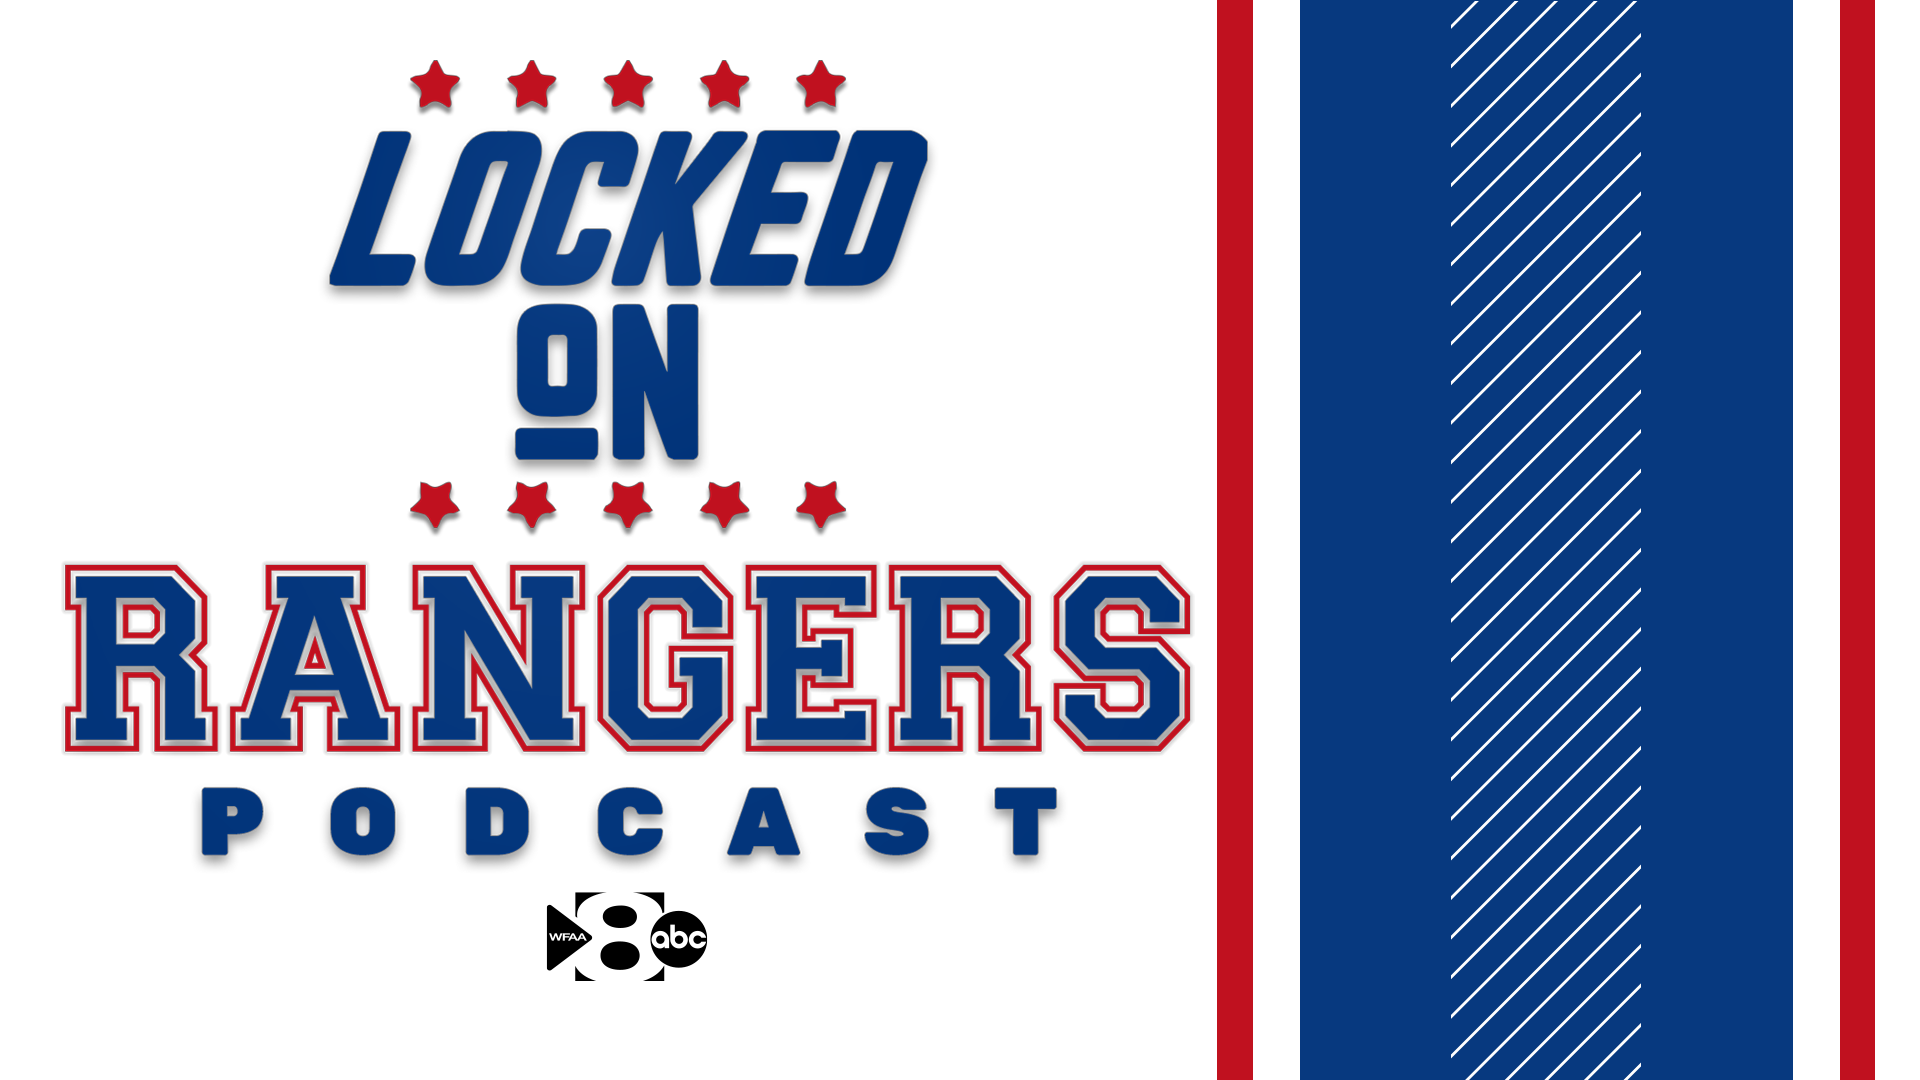 Episode 359: Brice Paterik discusses why the ESPN MLB Star Wars broadcast is a bad idea, Joey Gallo heating up, and Dane Dunning's rebound start.